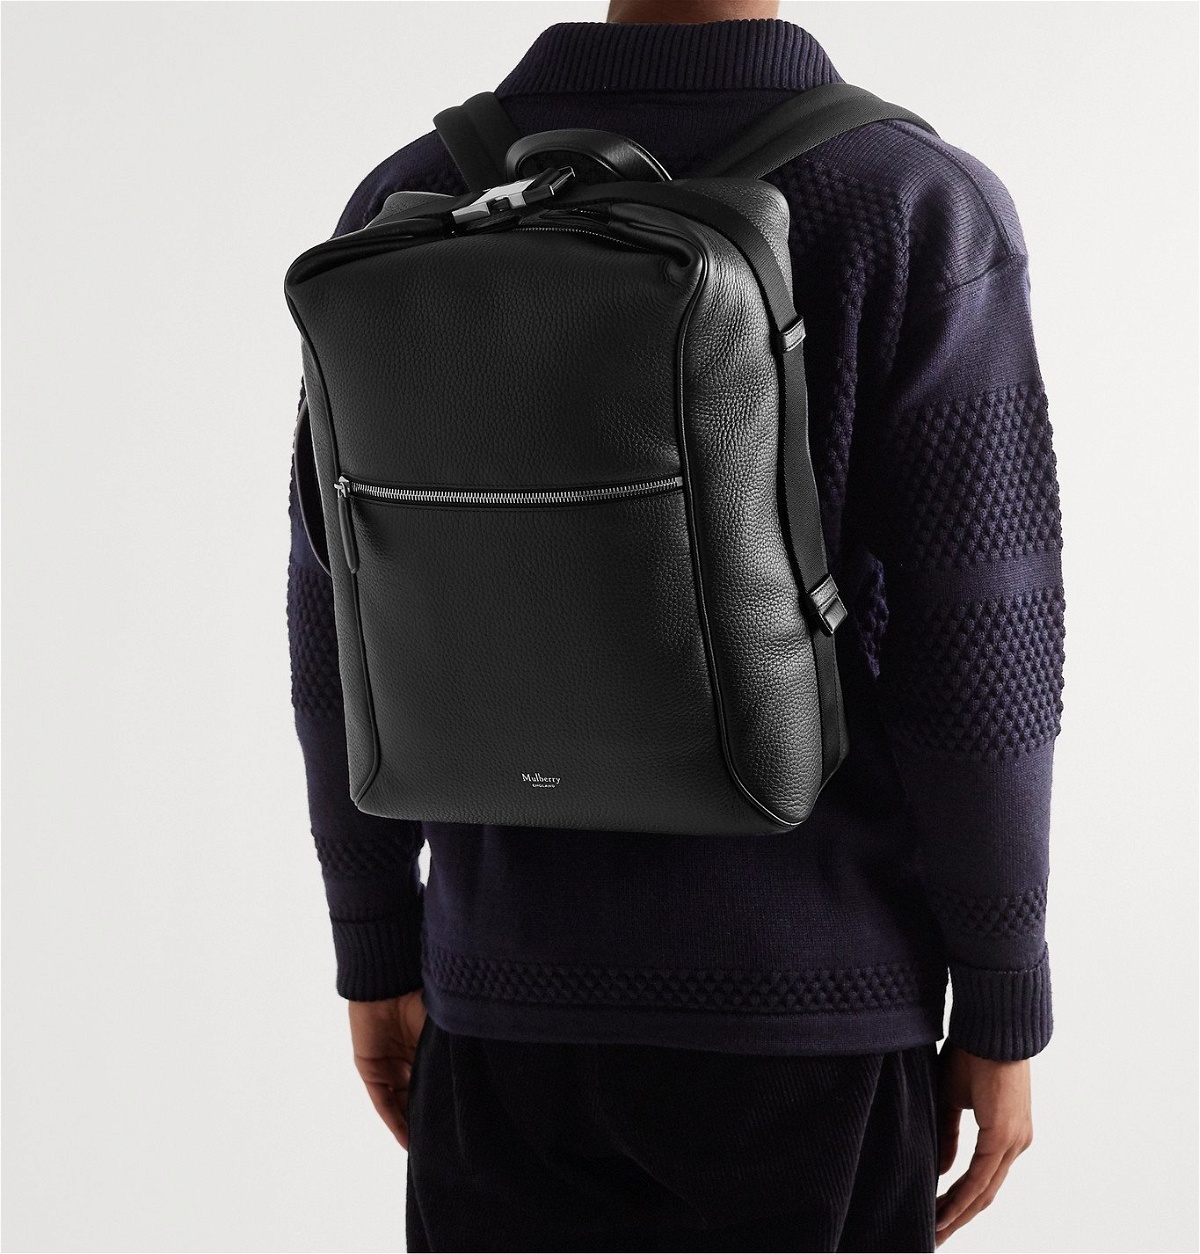 Mulberry - Urban Pebble-Grain Leather Backpack - Black Mulberry